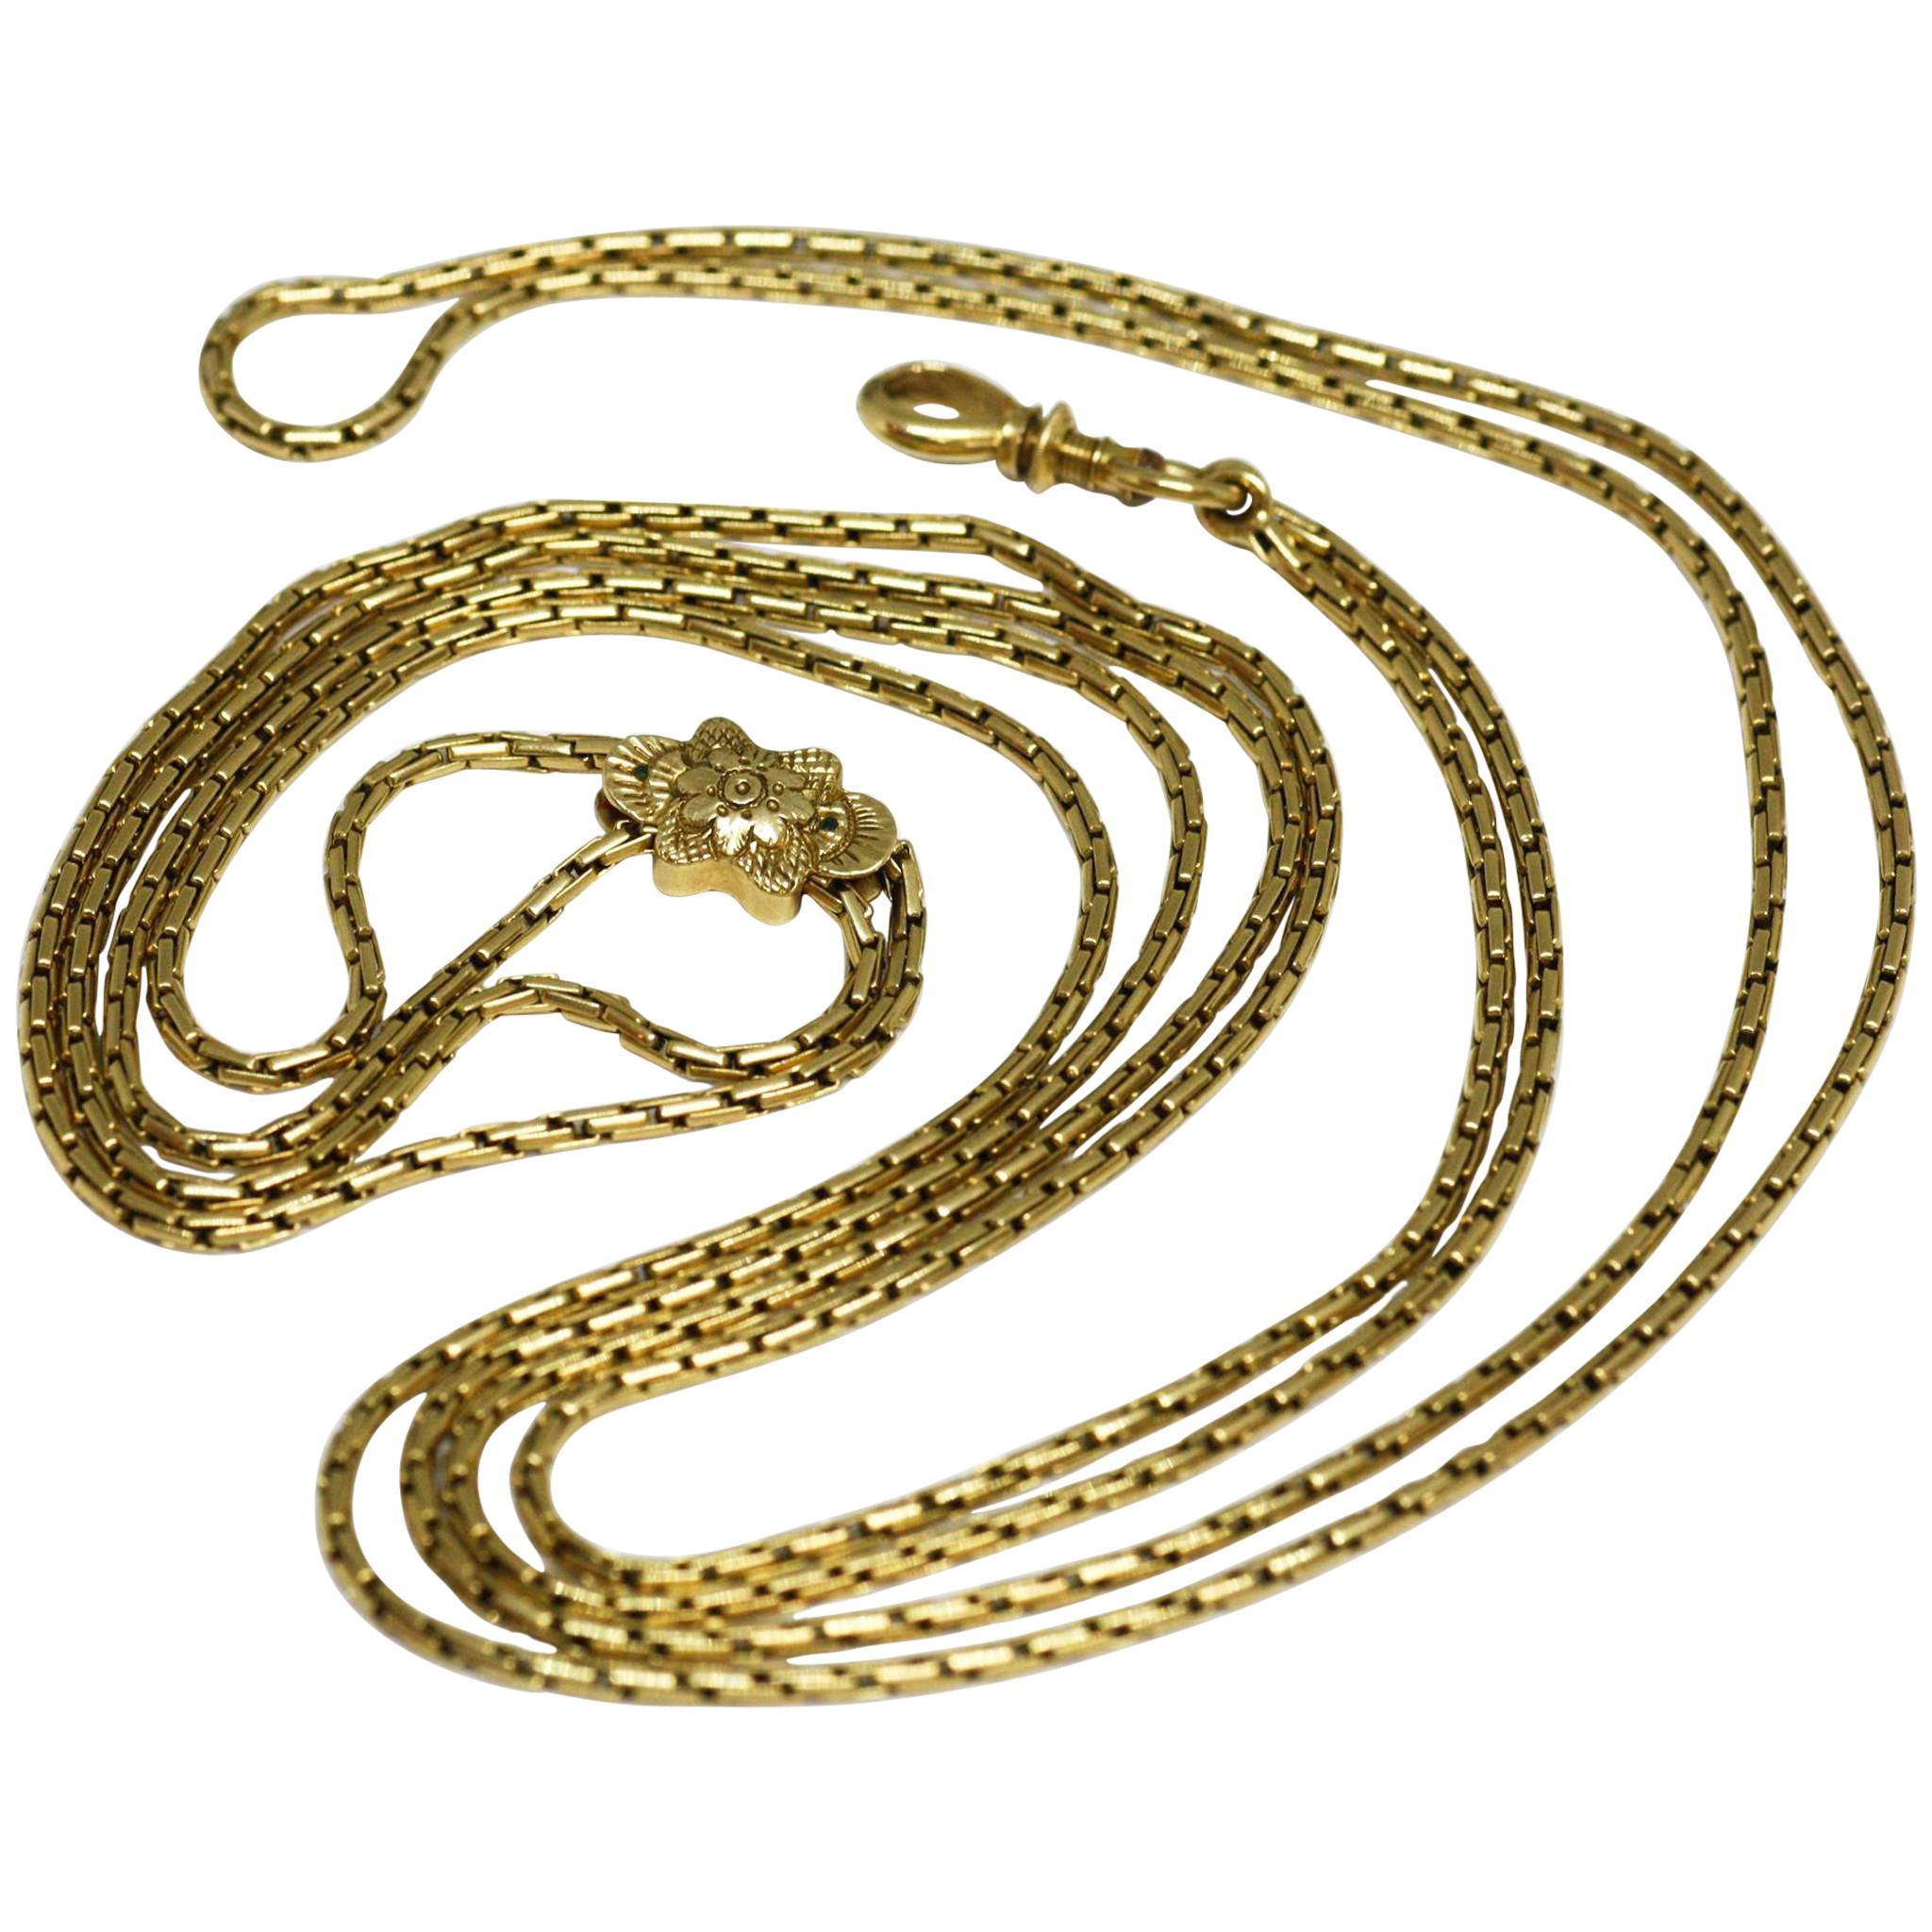 Antique French 1850 18 Karat Gold Long Chain Necklace